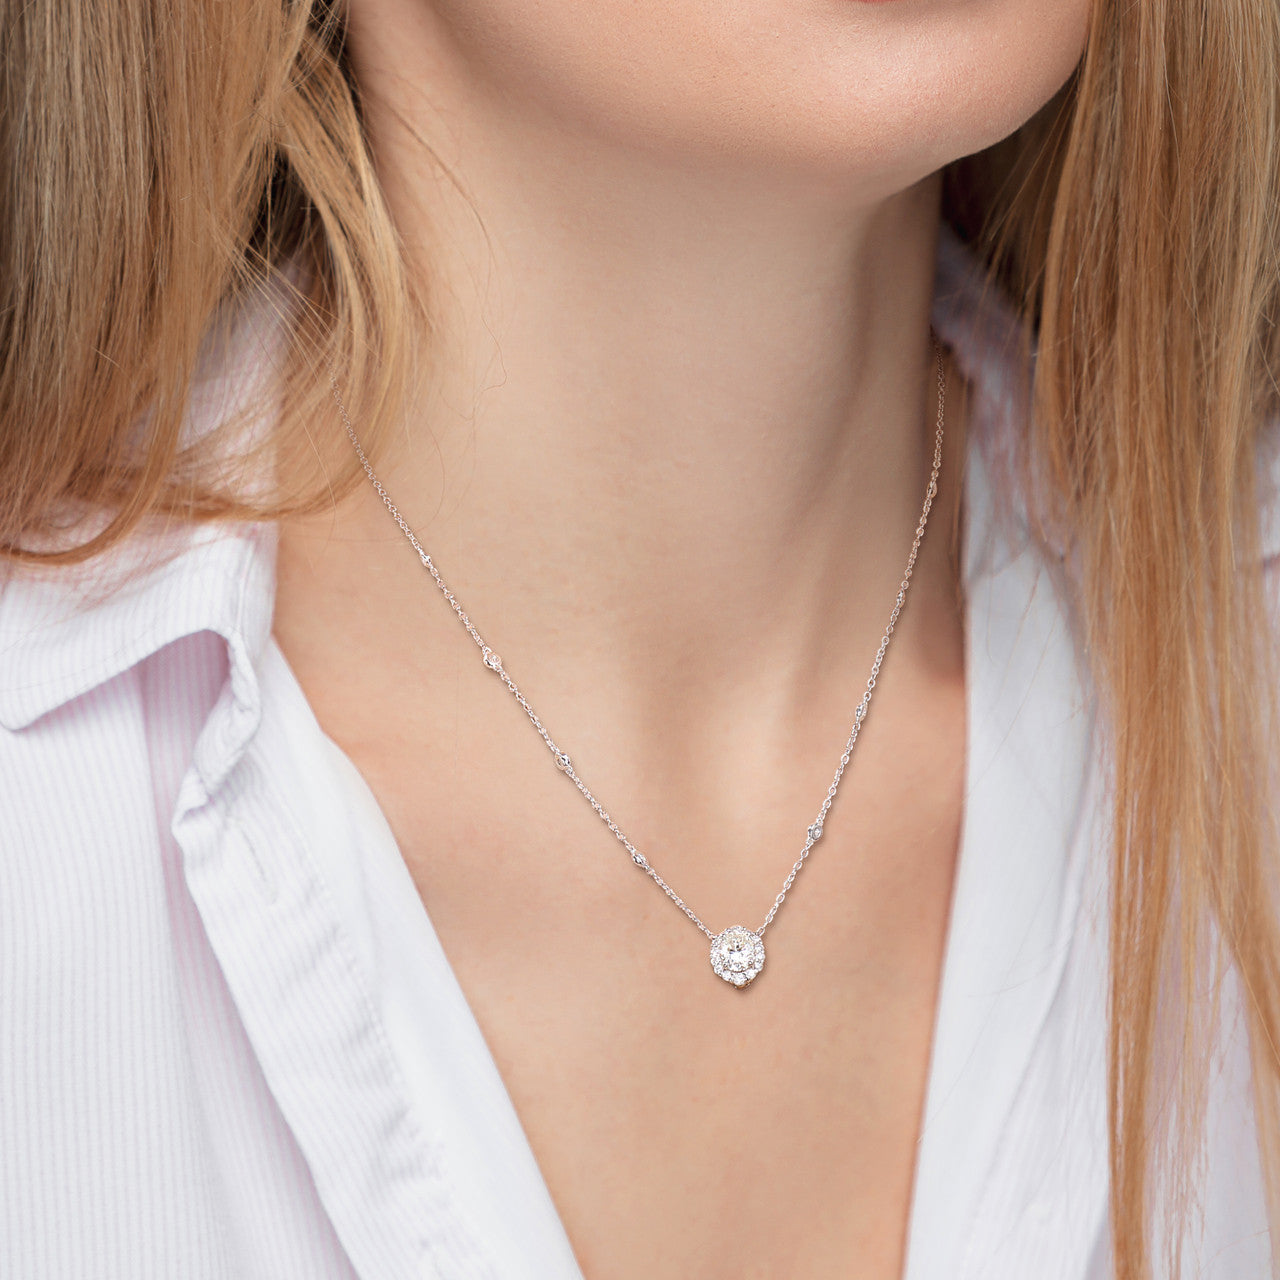 Ice Jewellery 1 1/2 CT Created Moissanite-White Necklace With Chain in Sterling Silver - 75000005763 | Ice Jewellery Australia